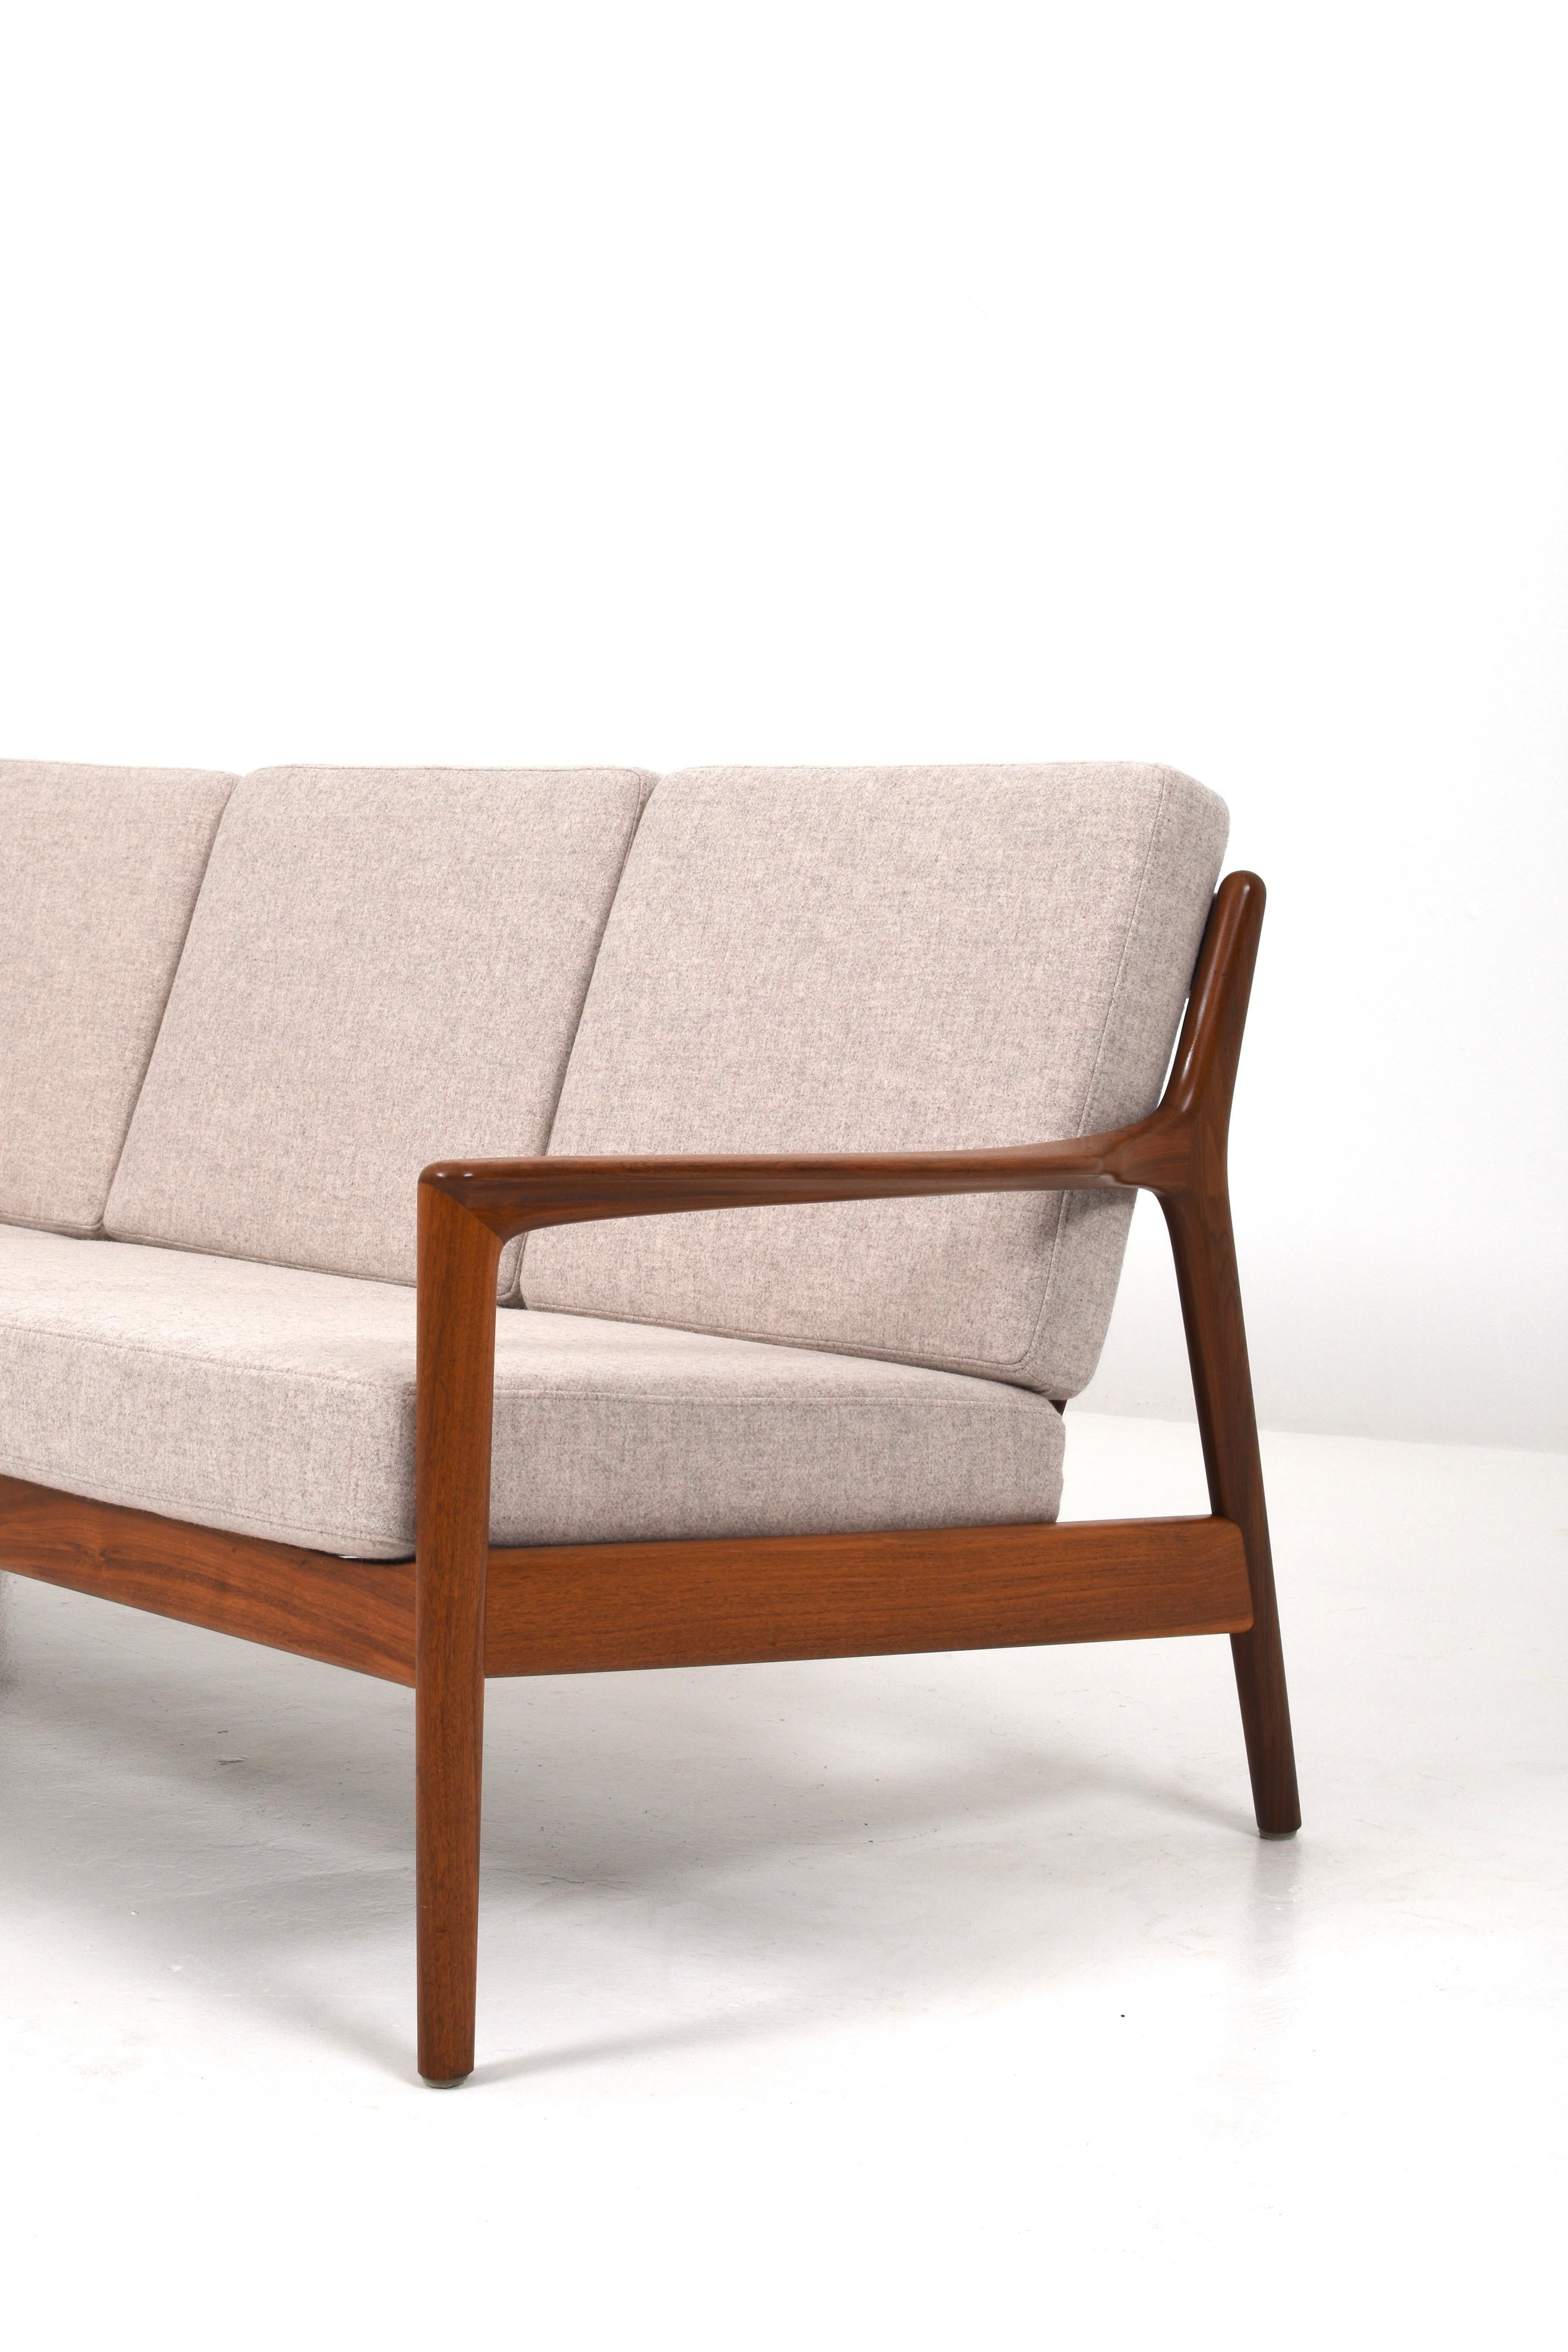 Mid-20th Century Folke Ohlsson Sofa Model USA-75 Produced by Dux in Sweden For Sale